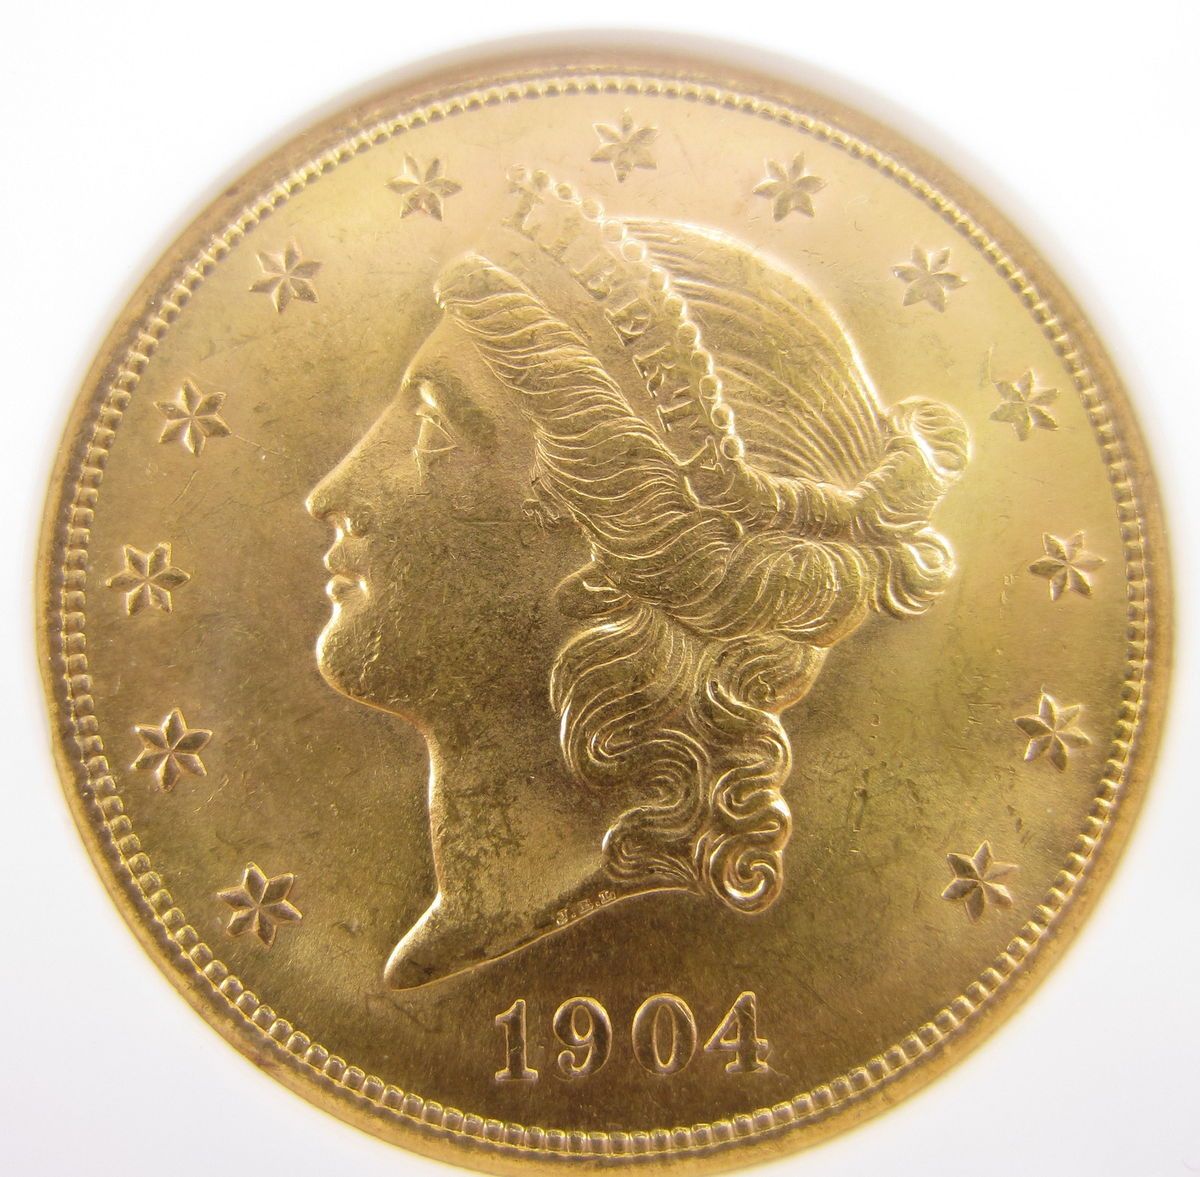  1904 s NGC MS 63 Gold Double Eagle $20